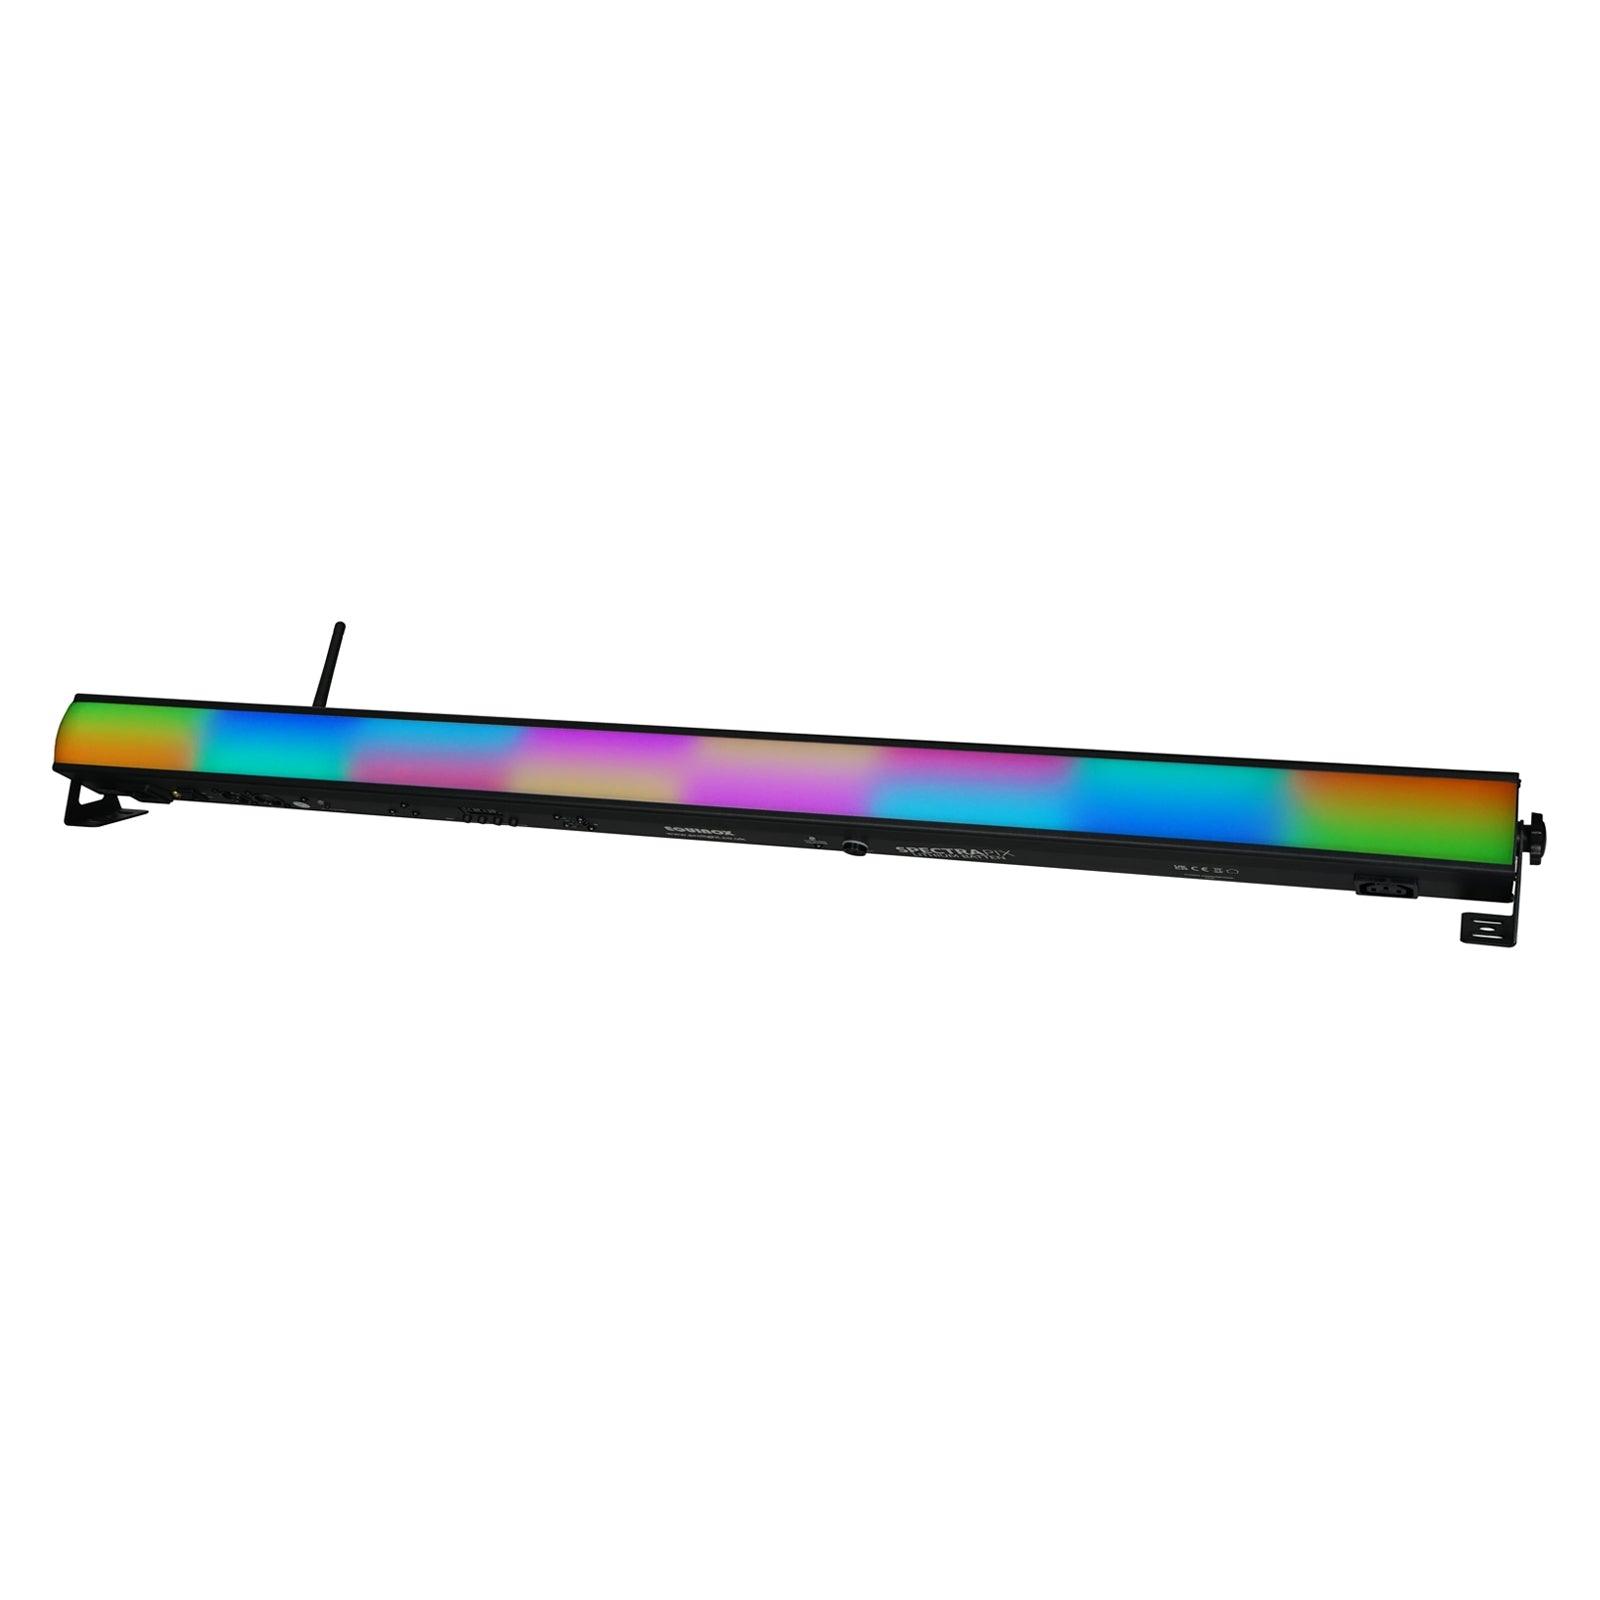 2 x Equinox SpectraPix Lithium Batten with Carry Bag - DY Pro Audio